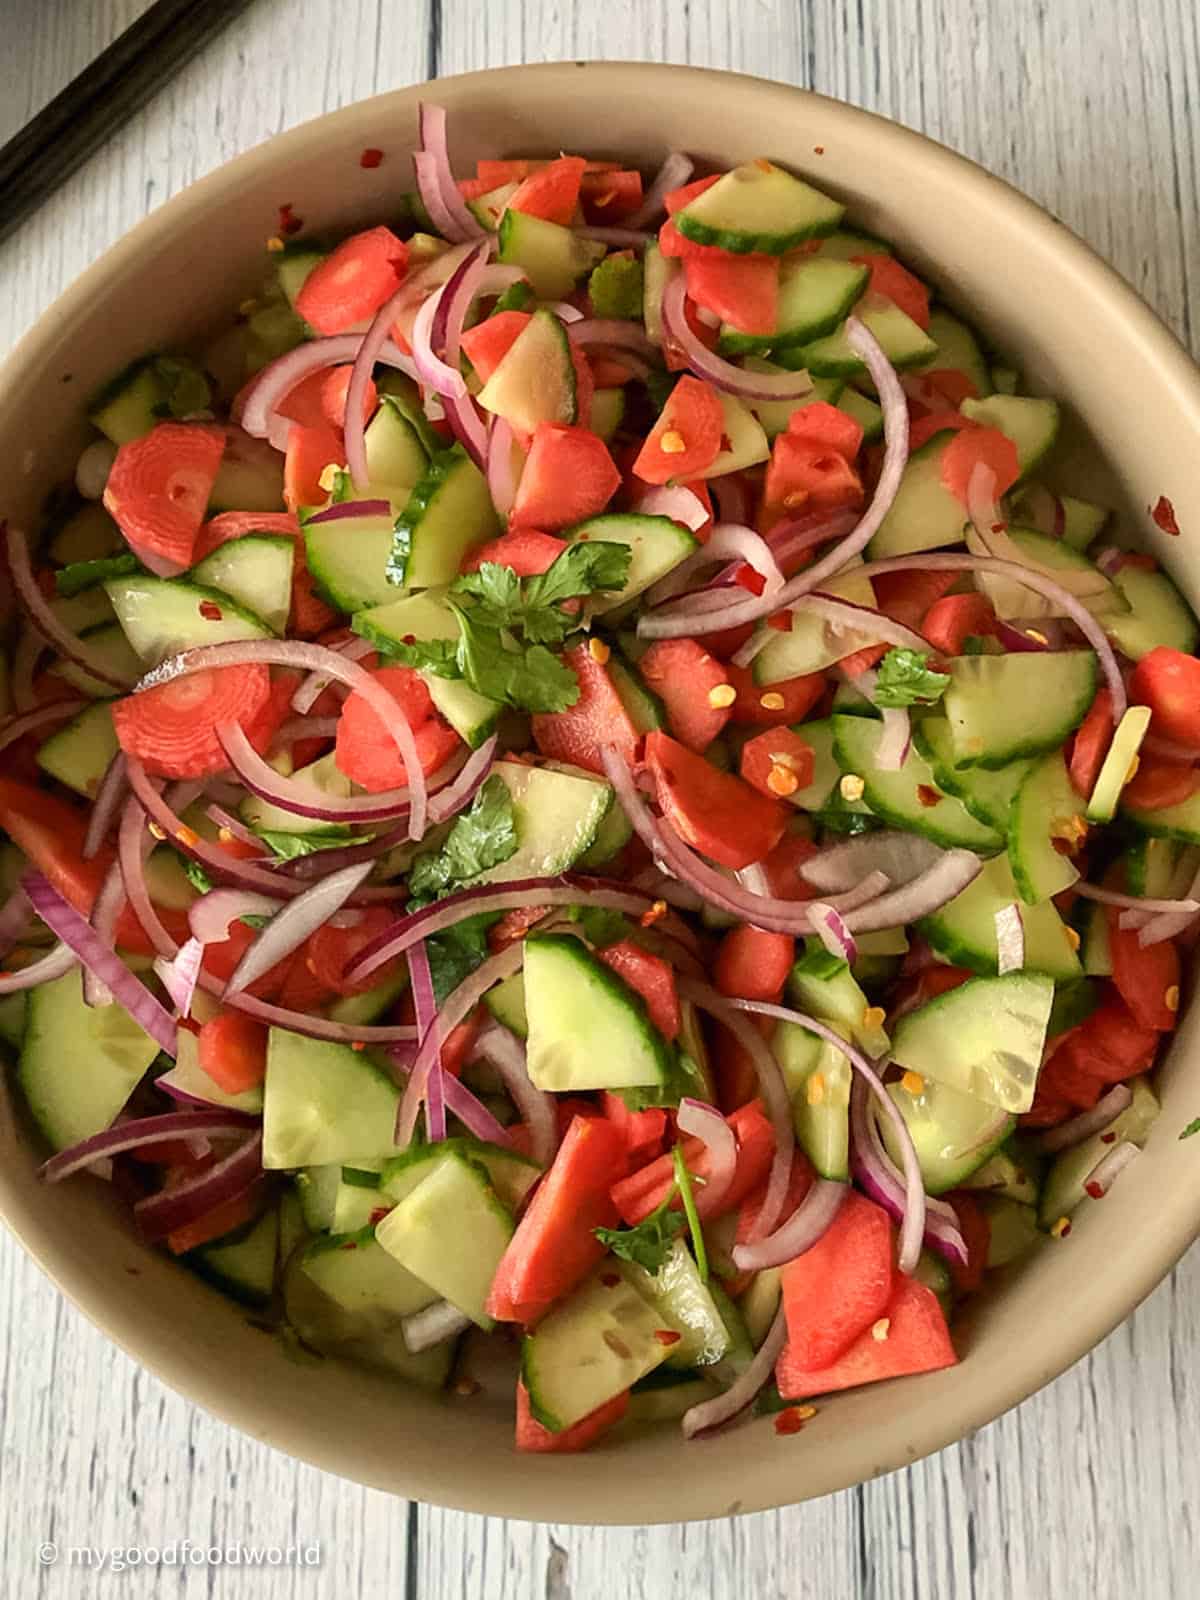 Simple carrot and cucumber salad with slivers of red onion and some red pepper flakes is served in a wide serving bowl.